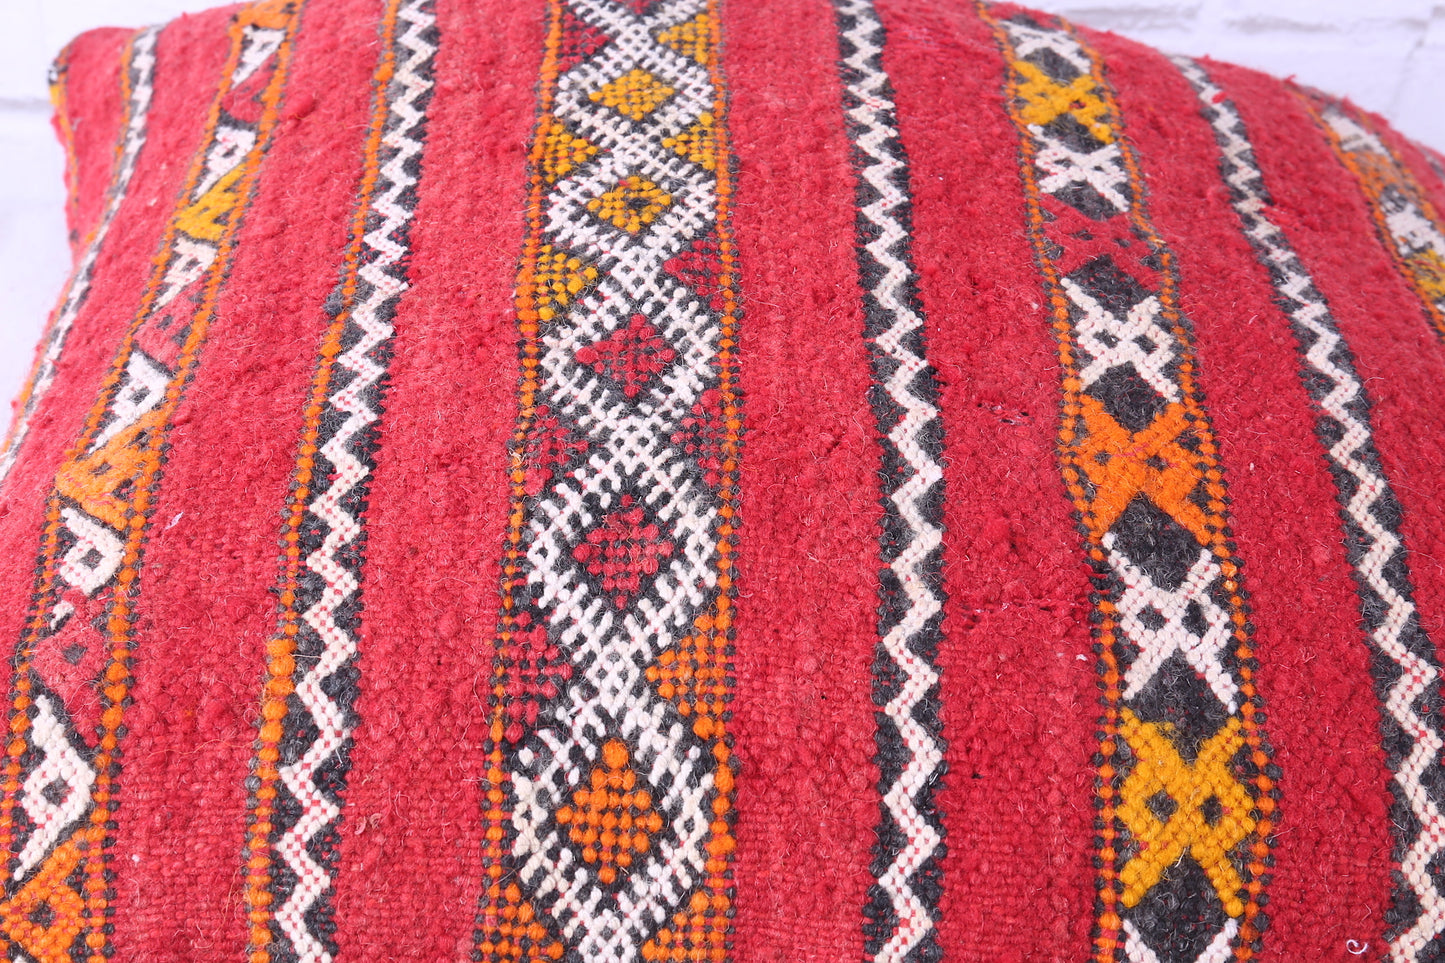 Square Moroccan rug pillow berber 19.6 inches X 19.6 inches